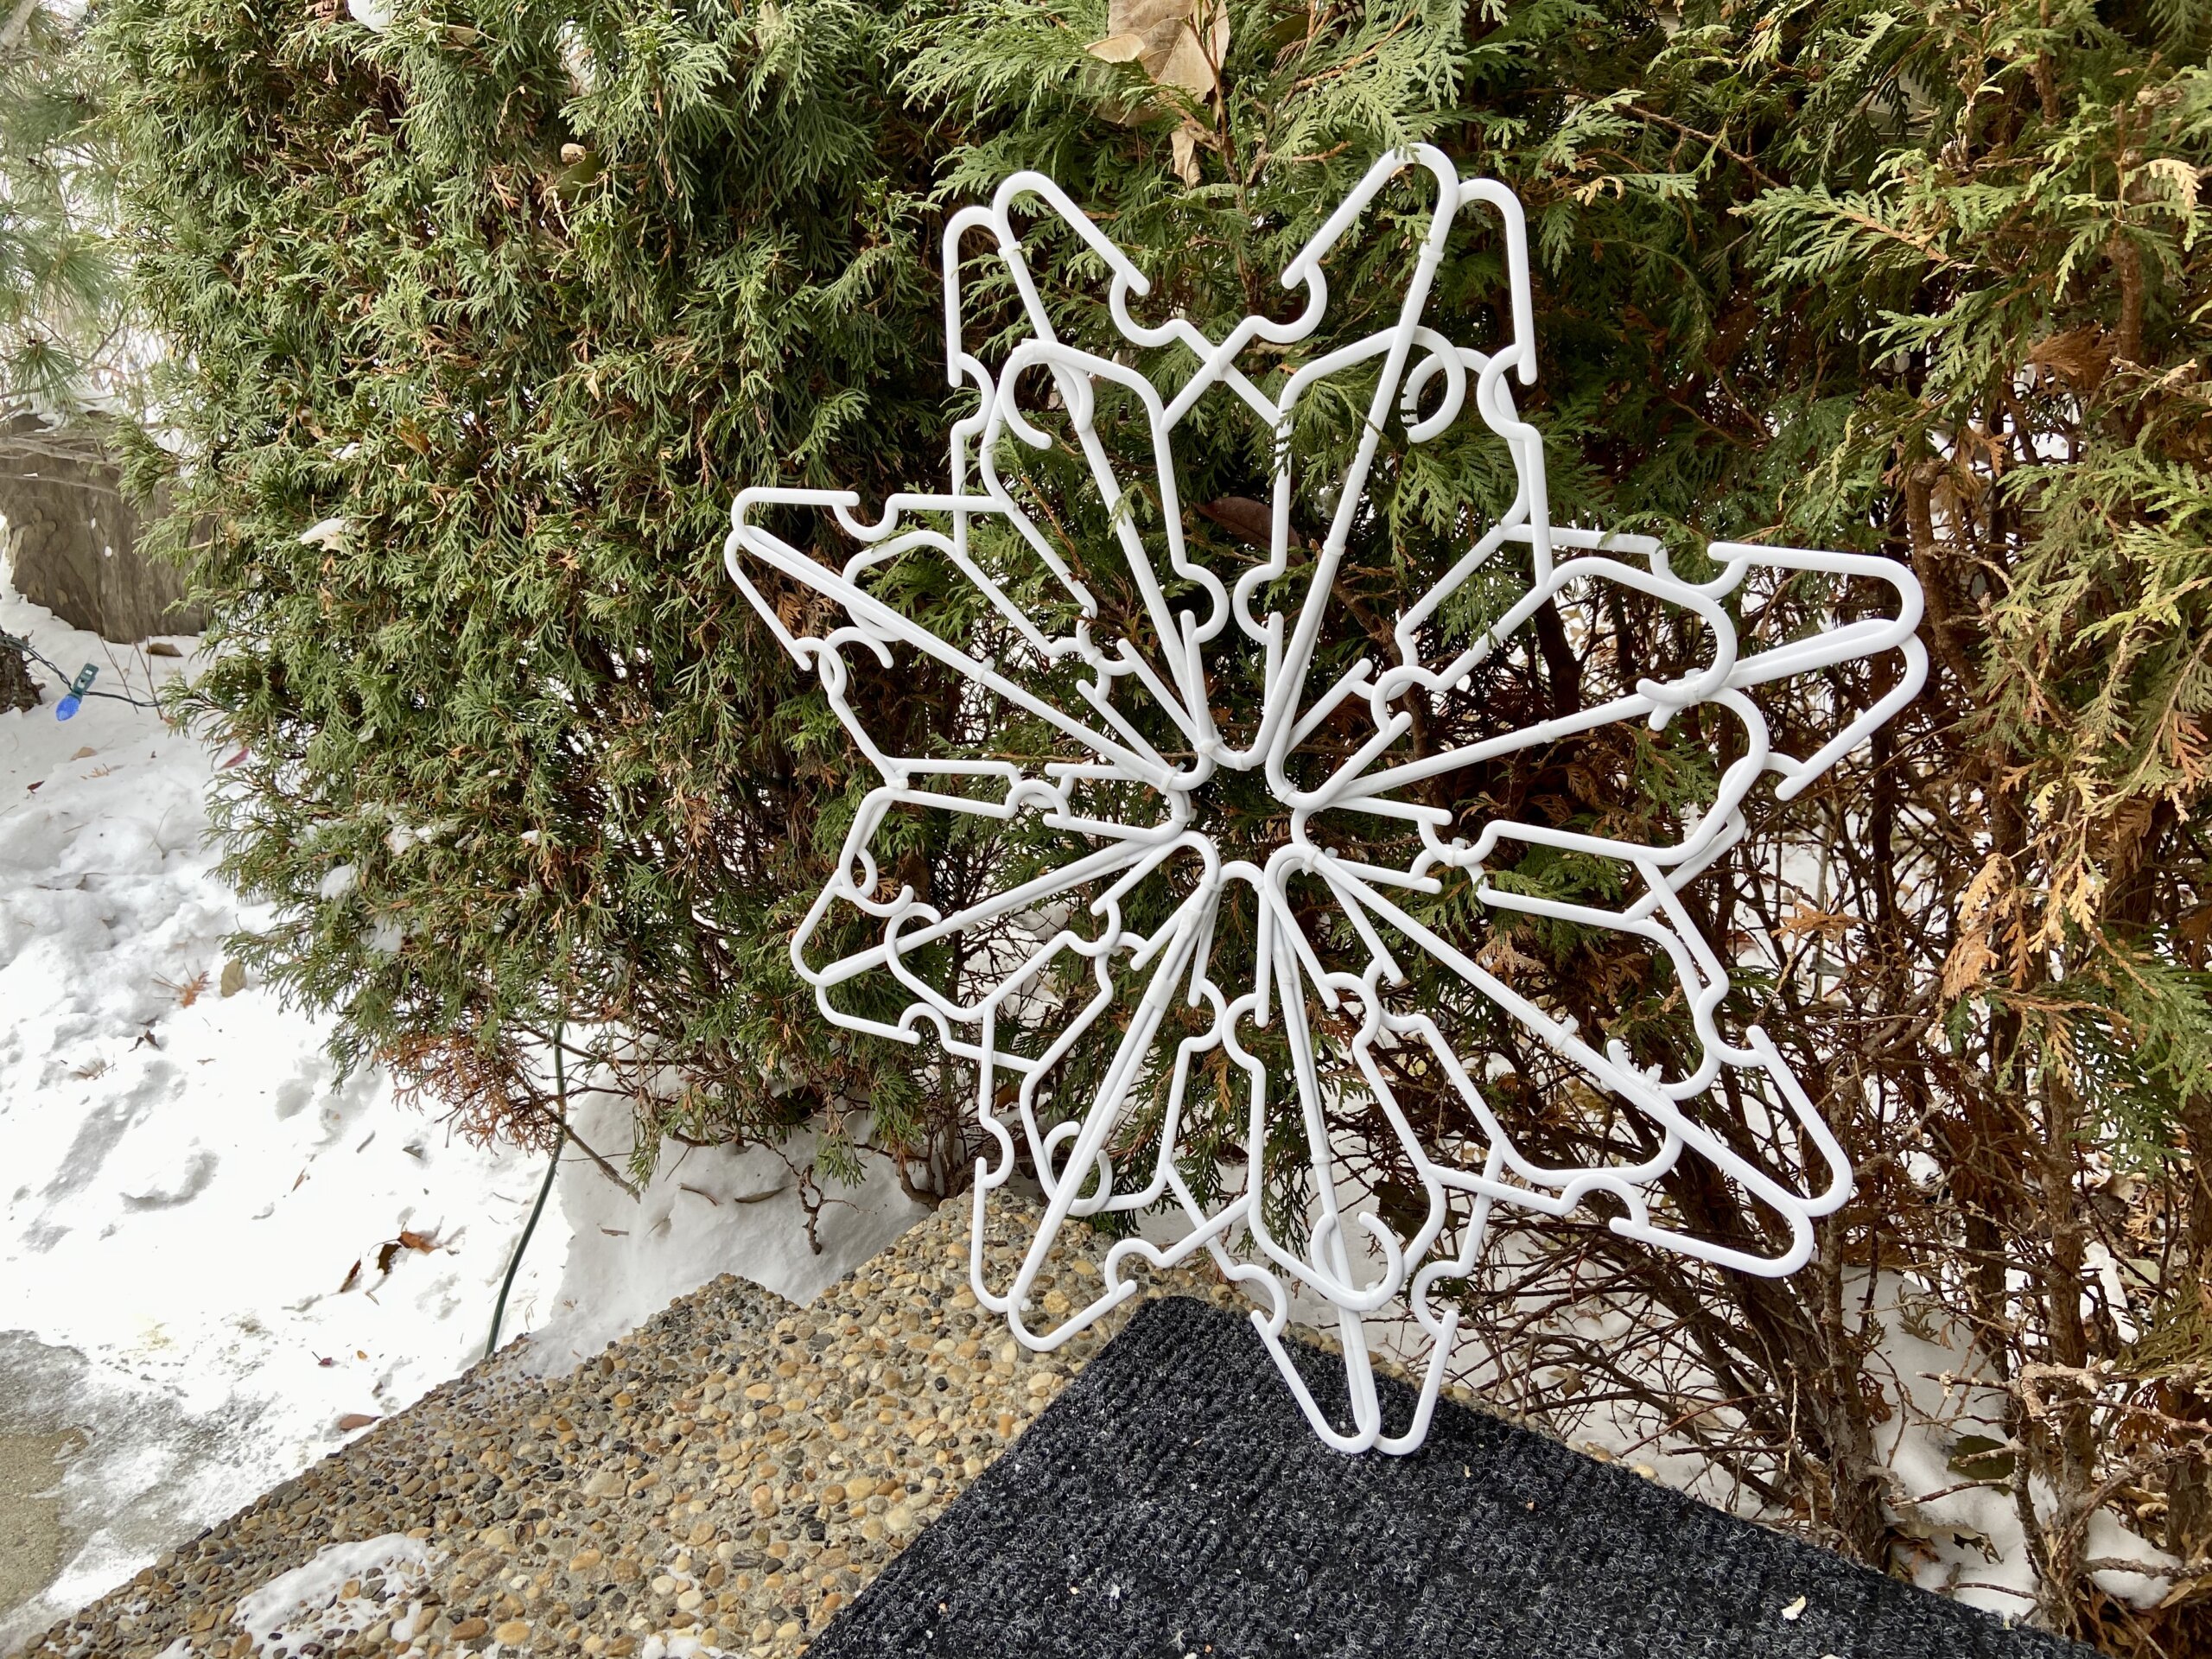 Clothes hanger snowflake : r/DiWHY